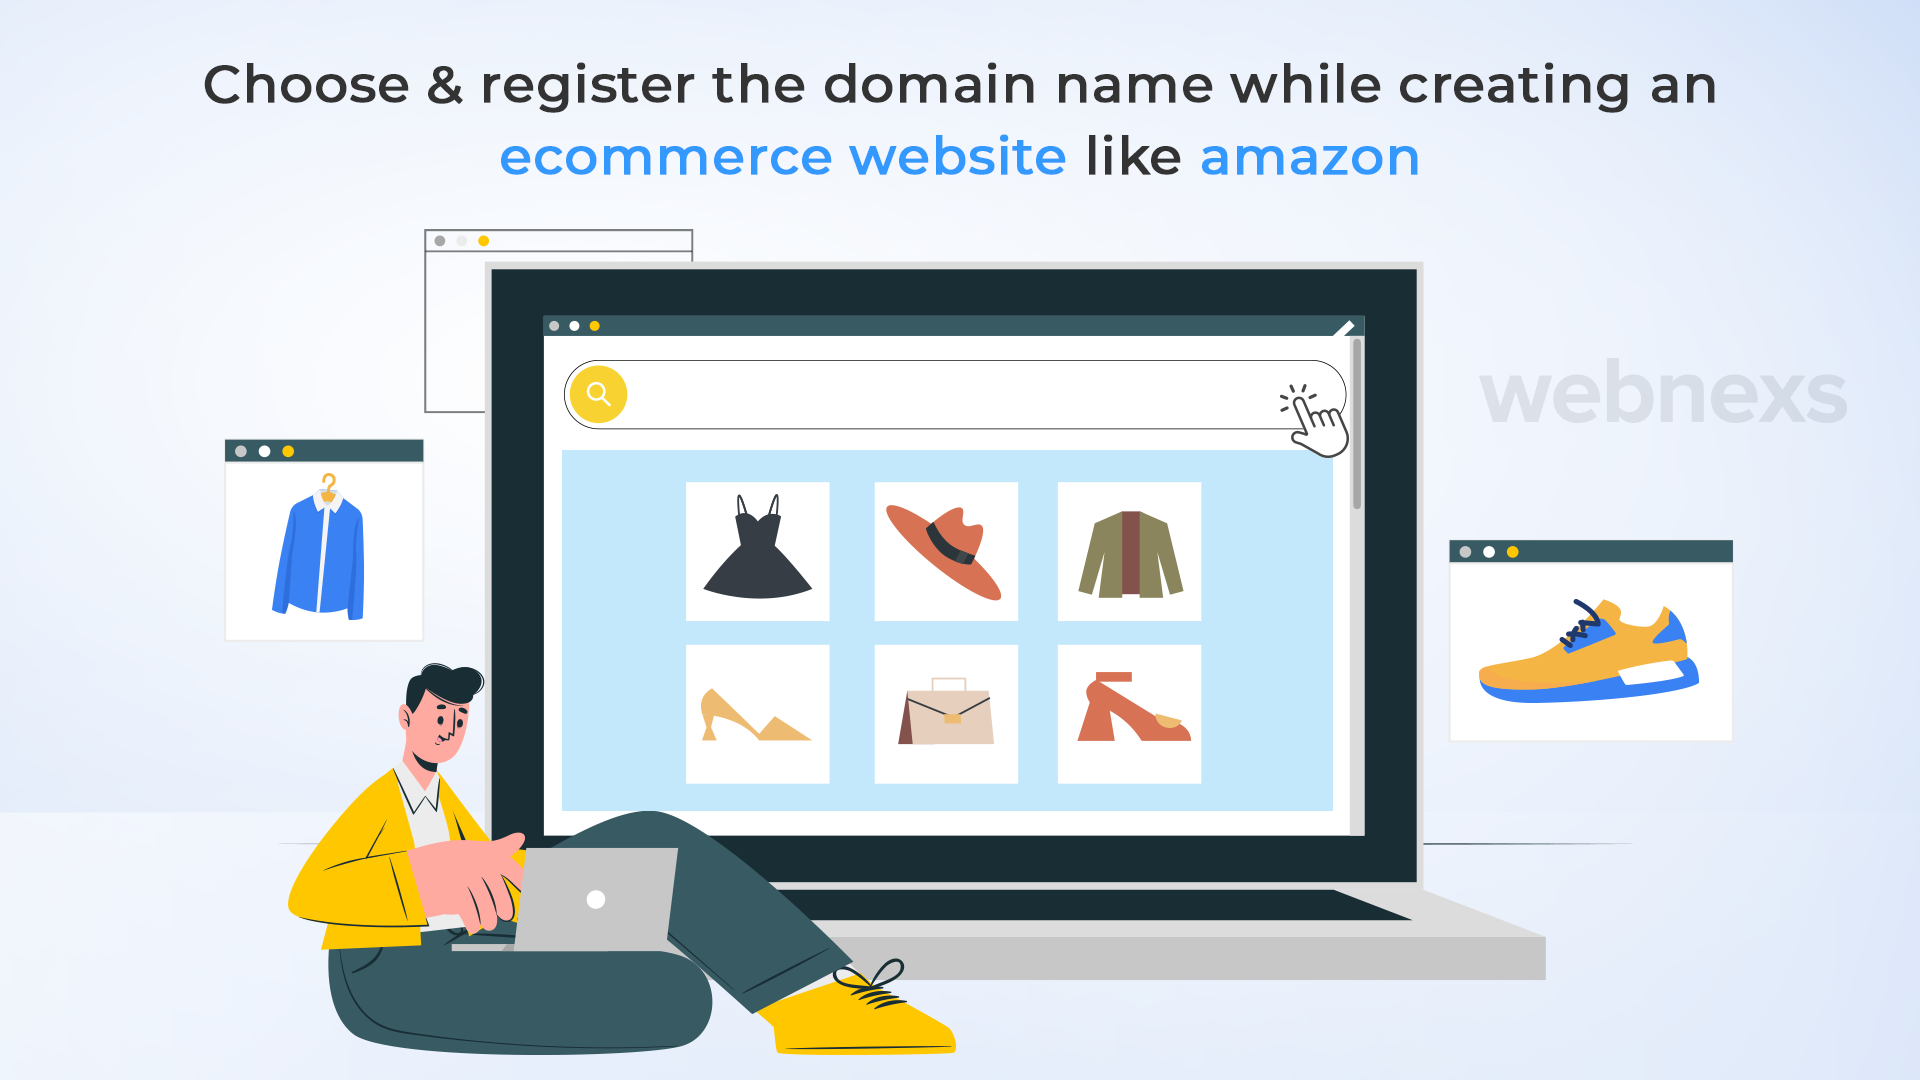 Step 03: Choose & register the domain name while creating an ecommerce website like amazon